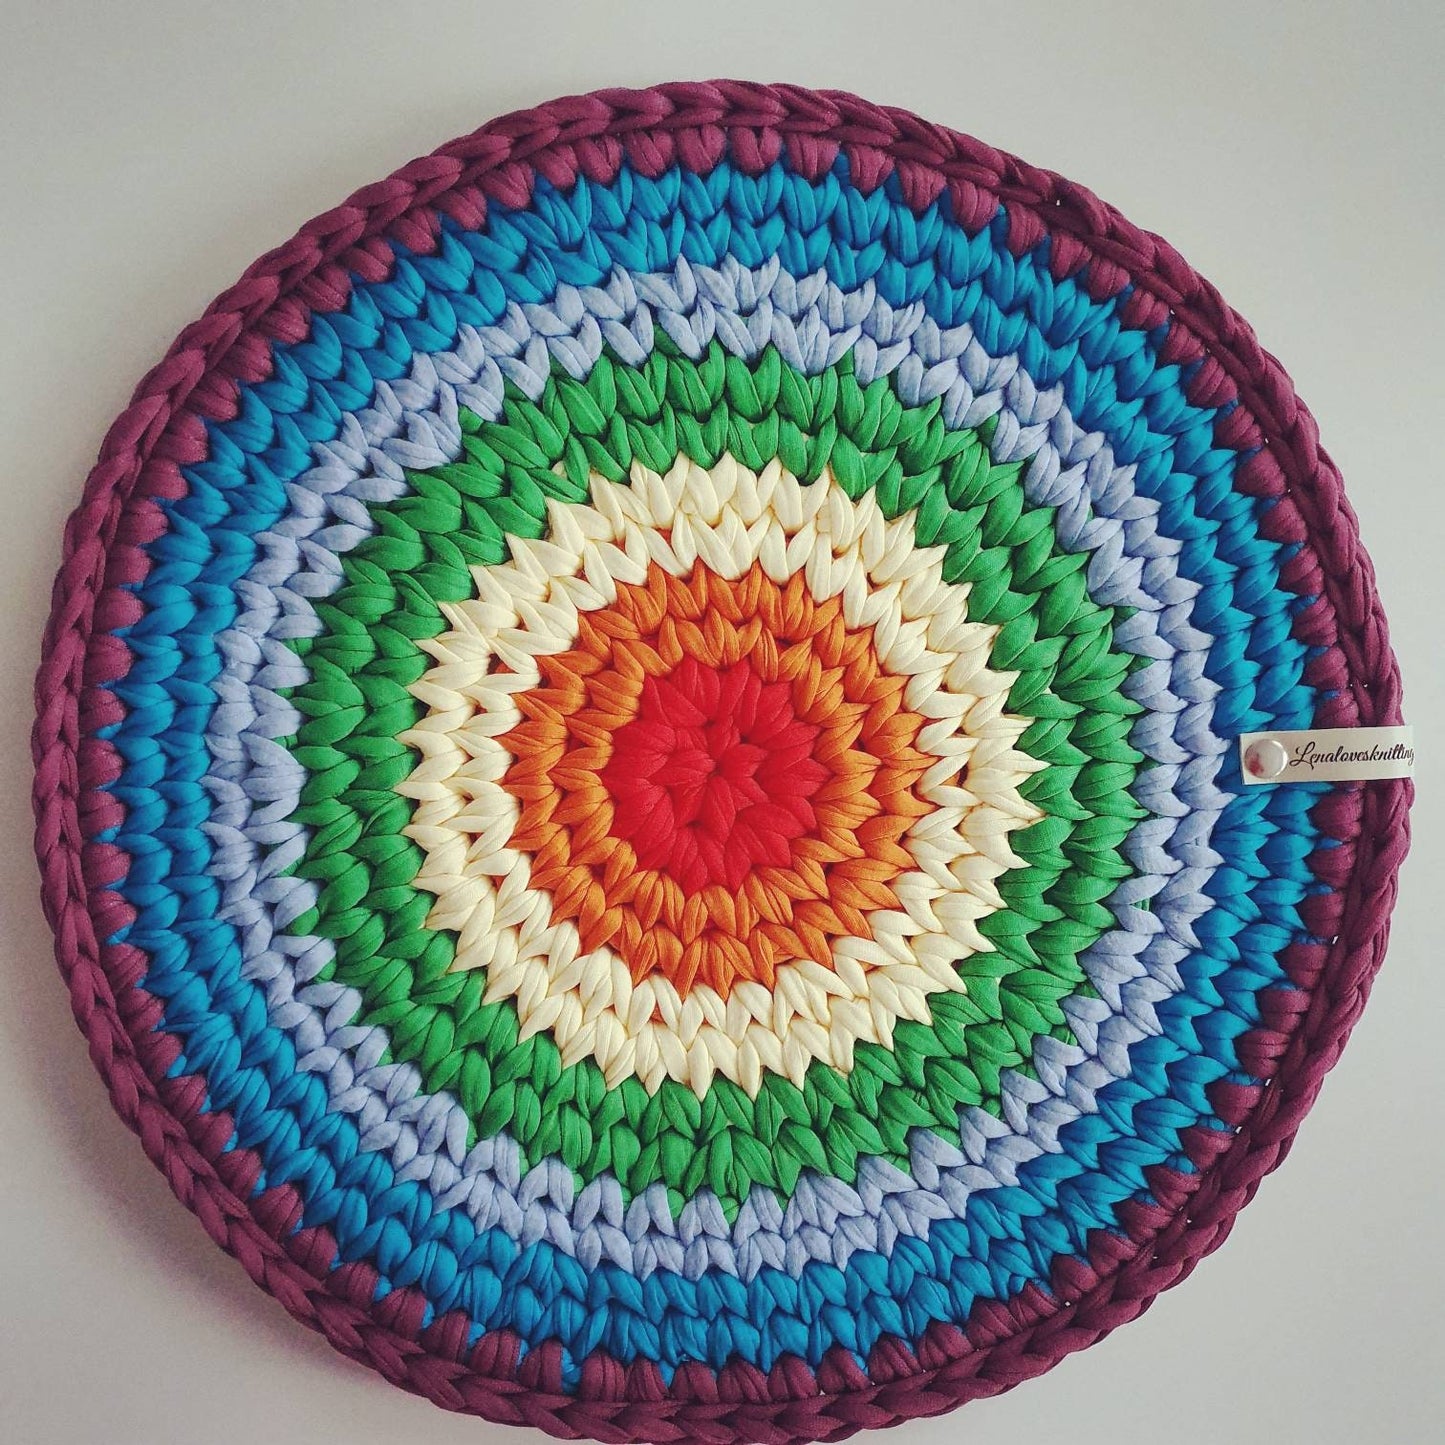 Rainbow basket storage basket Utensilo crocheted from recycled cotton textile yarn Different sizes